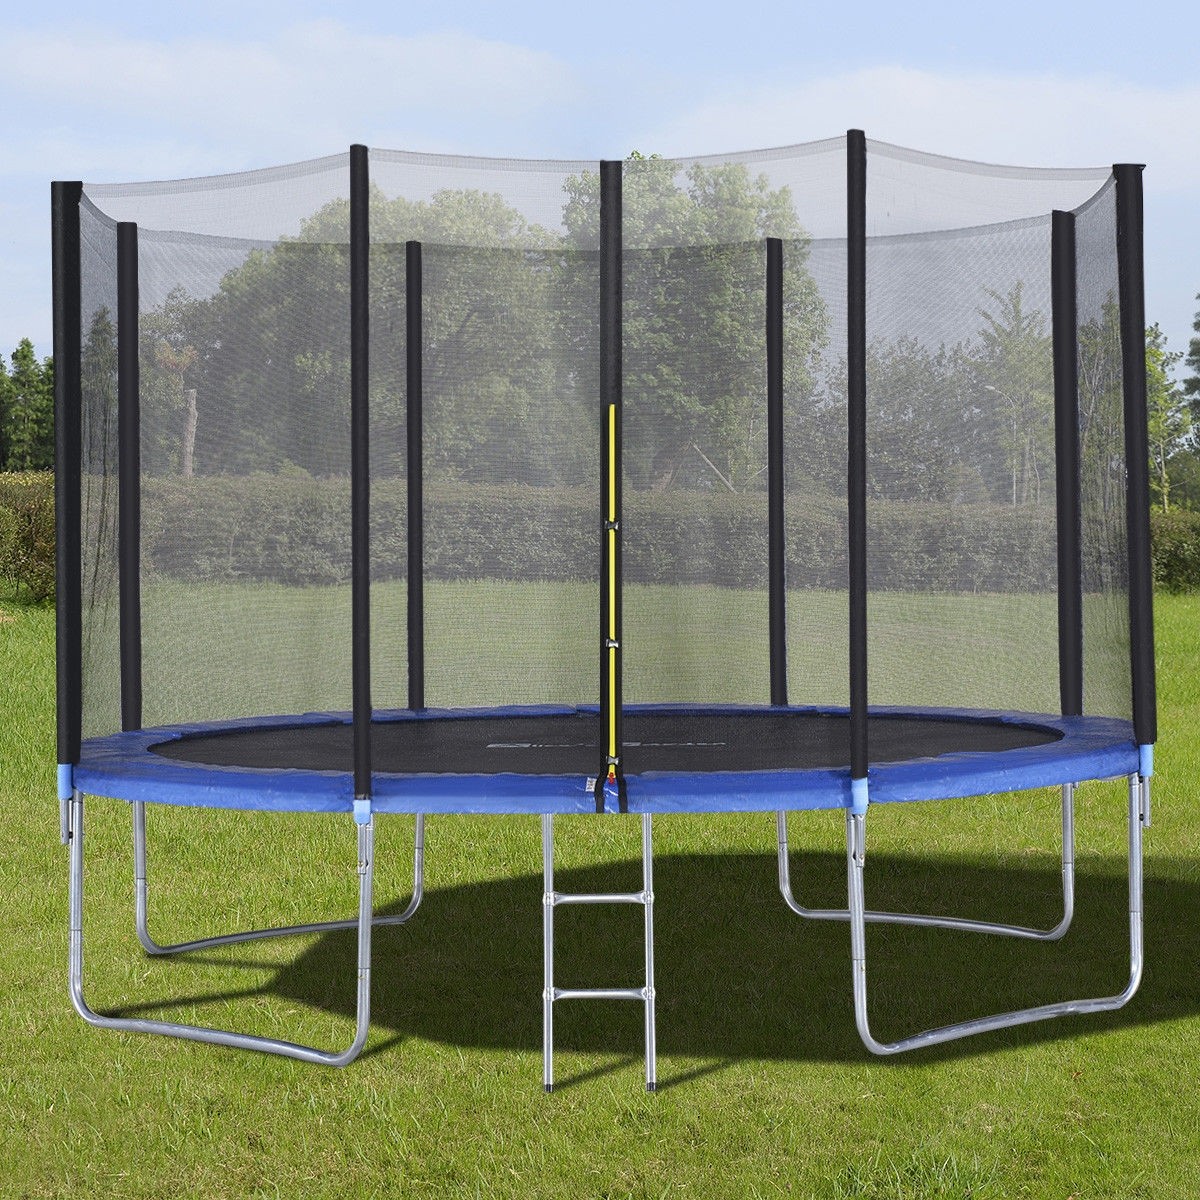 12 Ft. Trampoline With Enclosure Net, Spring Pad And Ladder